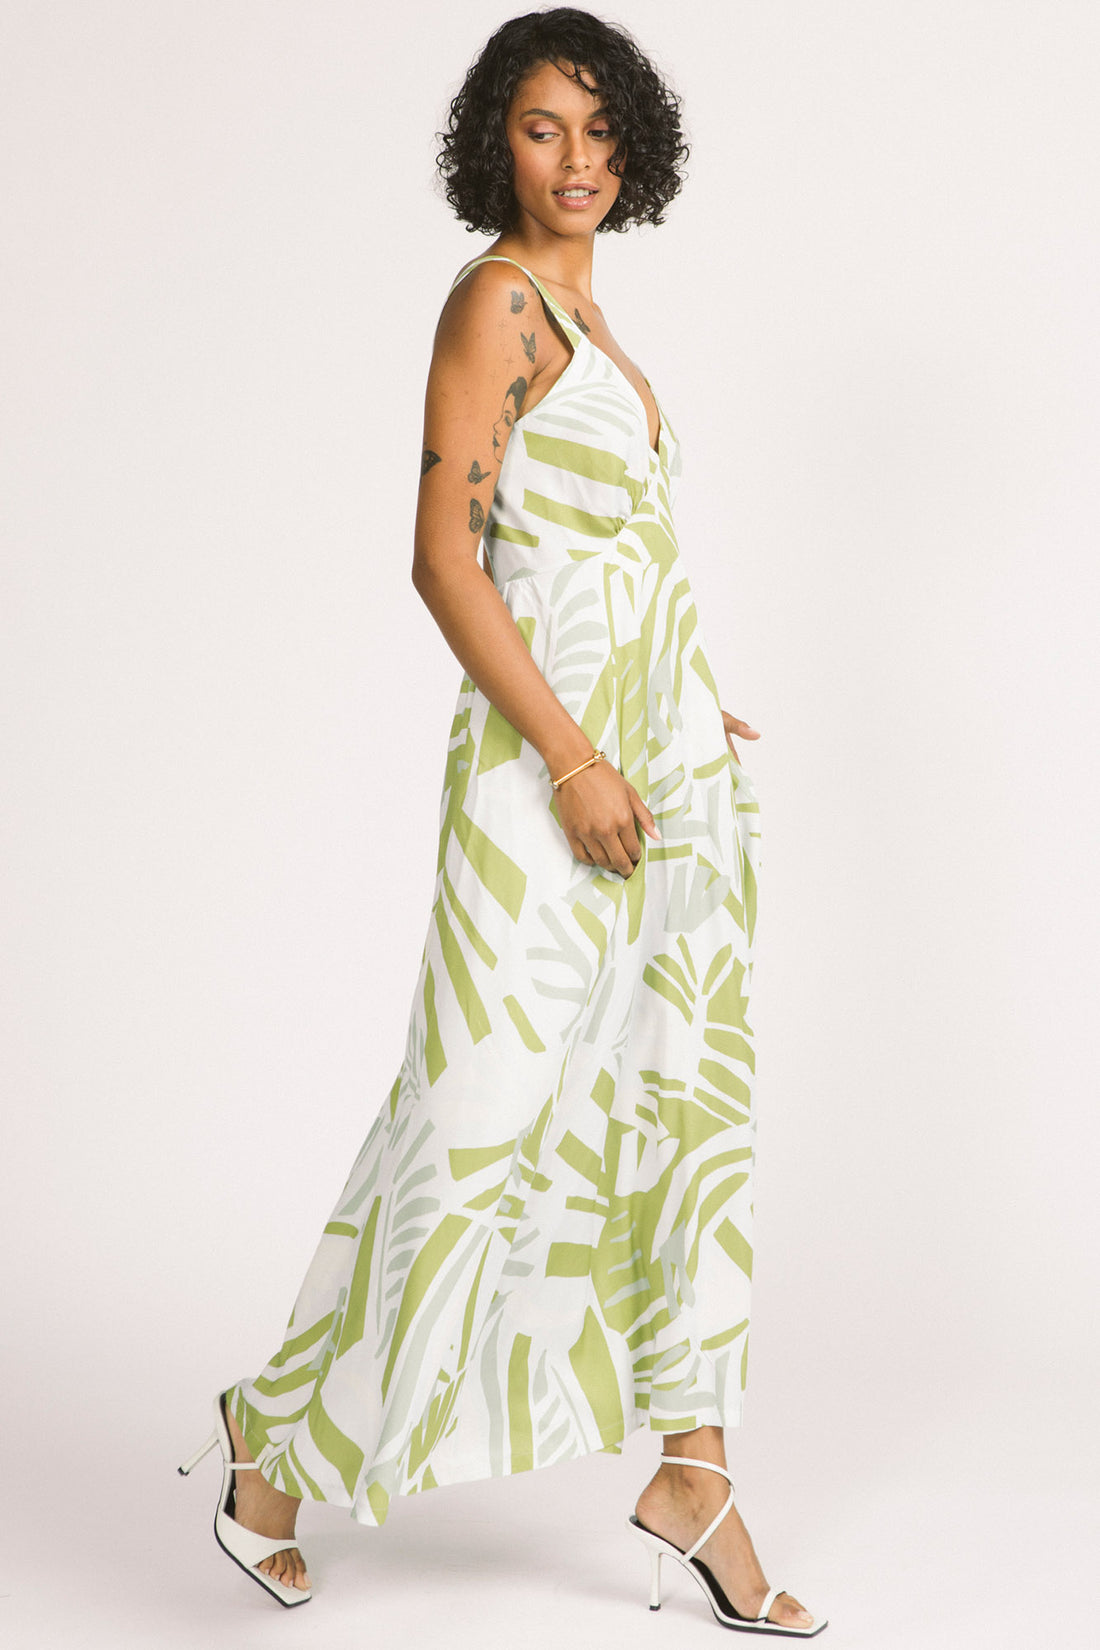 Alora Dress by Allison Wonderland, Frond Leaf, side view, wide straps, deep V-neckline, gathers on underbust seams, in-seam pockets, maxi skirt, eco-fabric, Lenzing Ecovero Viscose, sizes 2-12, made in Vancouver 